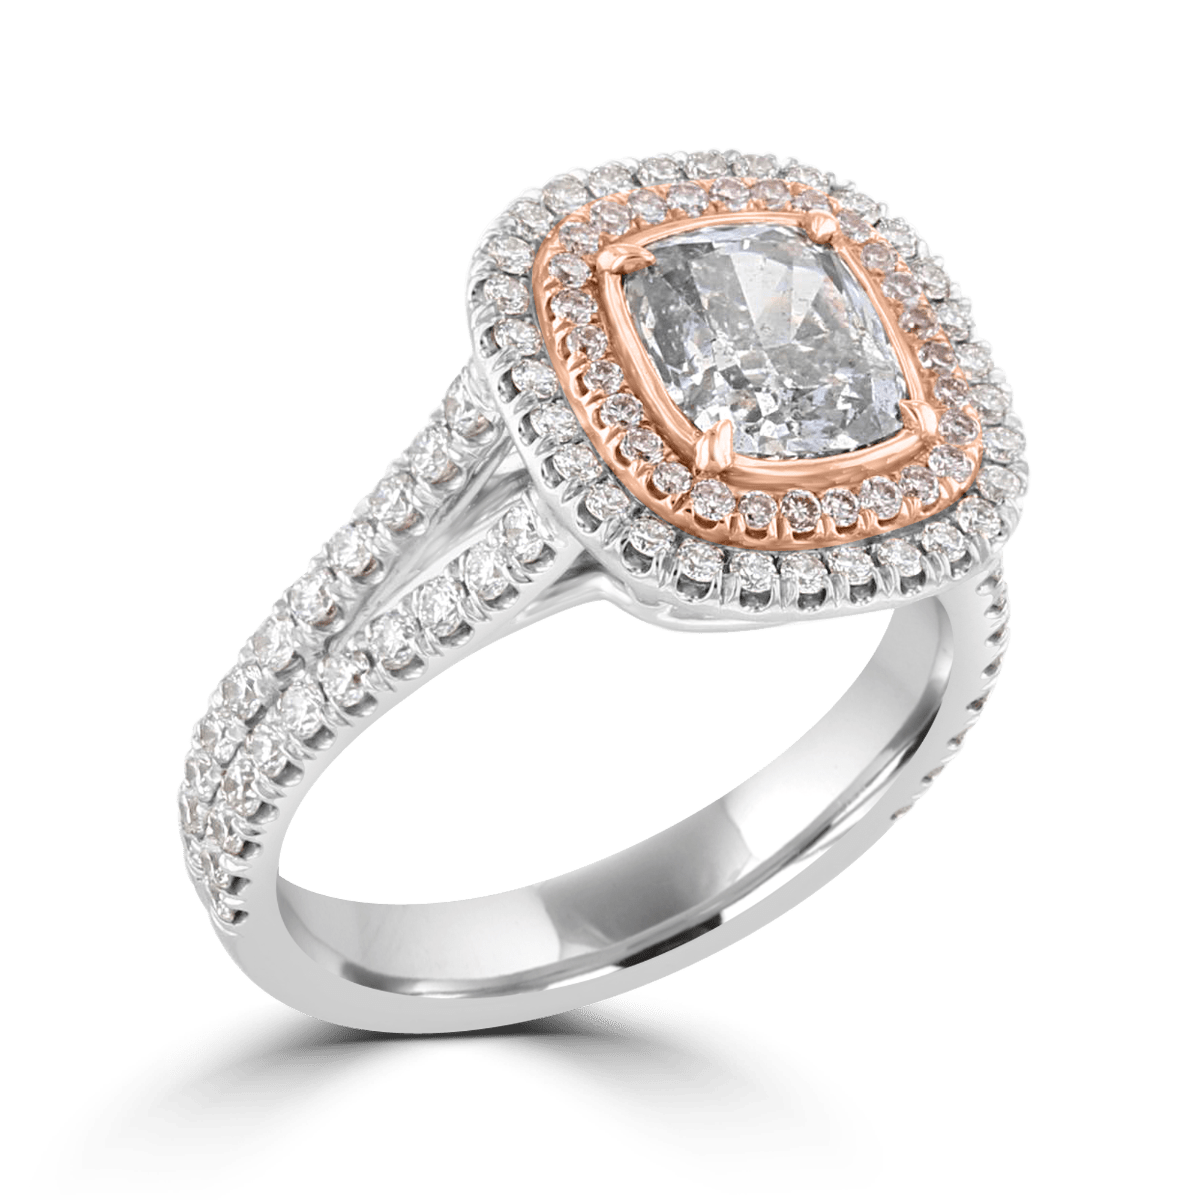 18KT WHITE GOLD 2.43 CTW GRAY, PINK, & NEAR COLORLESS DIAMOND HALO